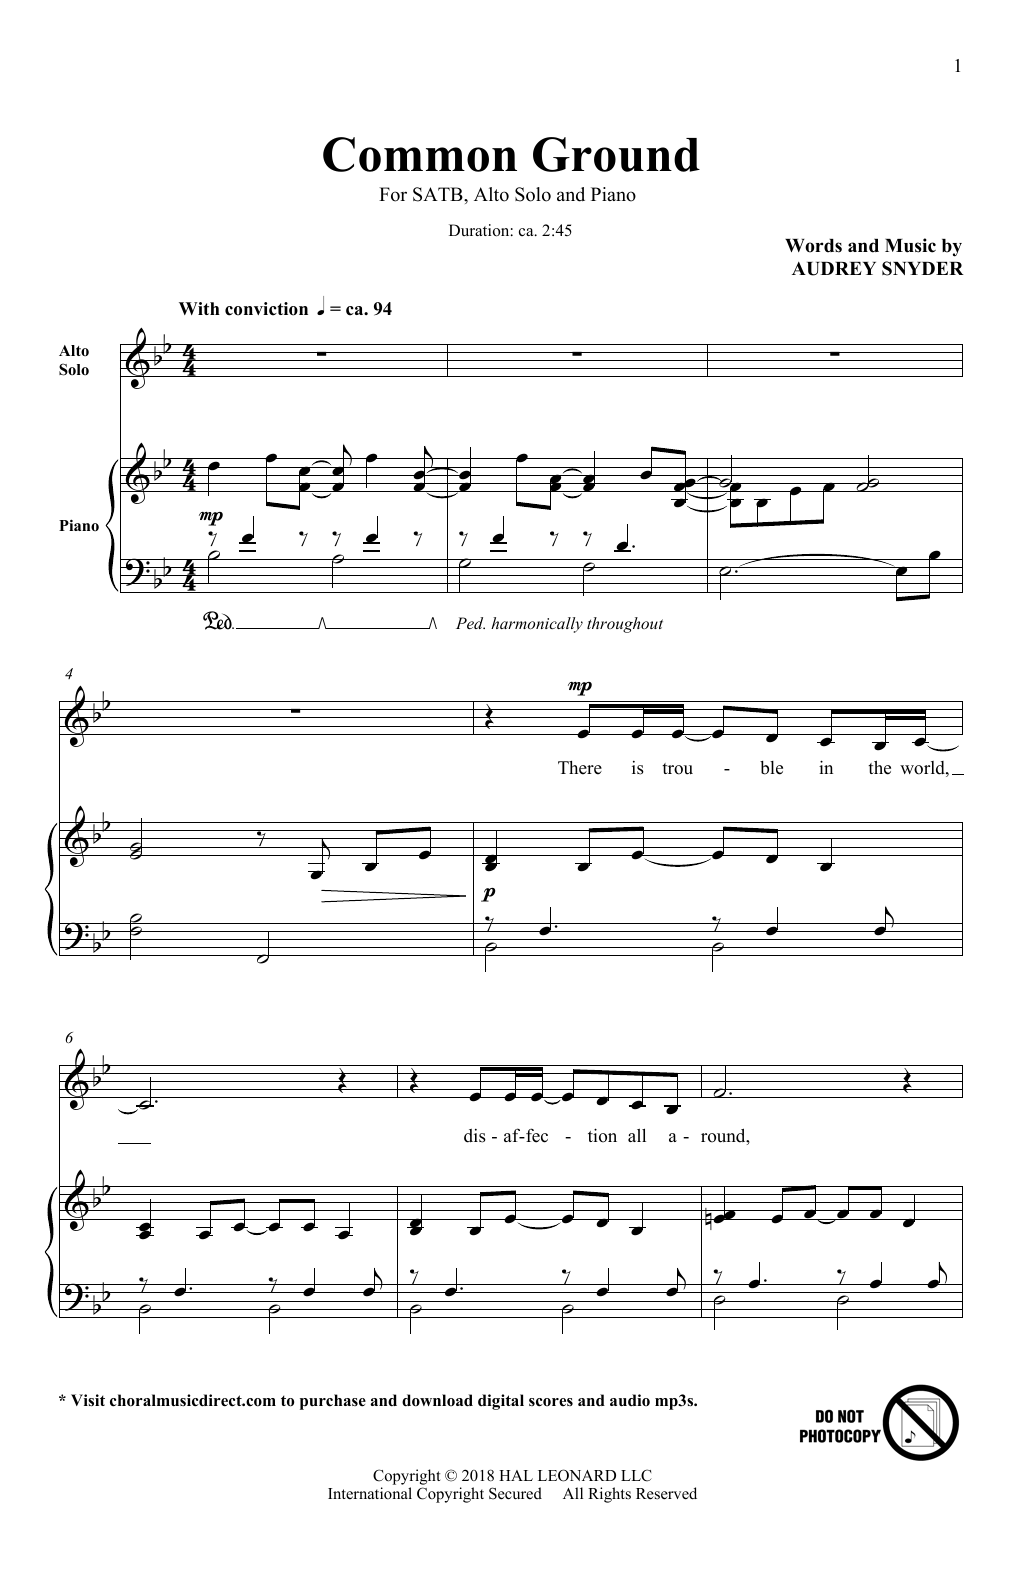 Download Audrey Snyder Common Ground Sheet Music